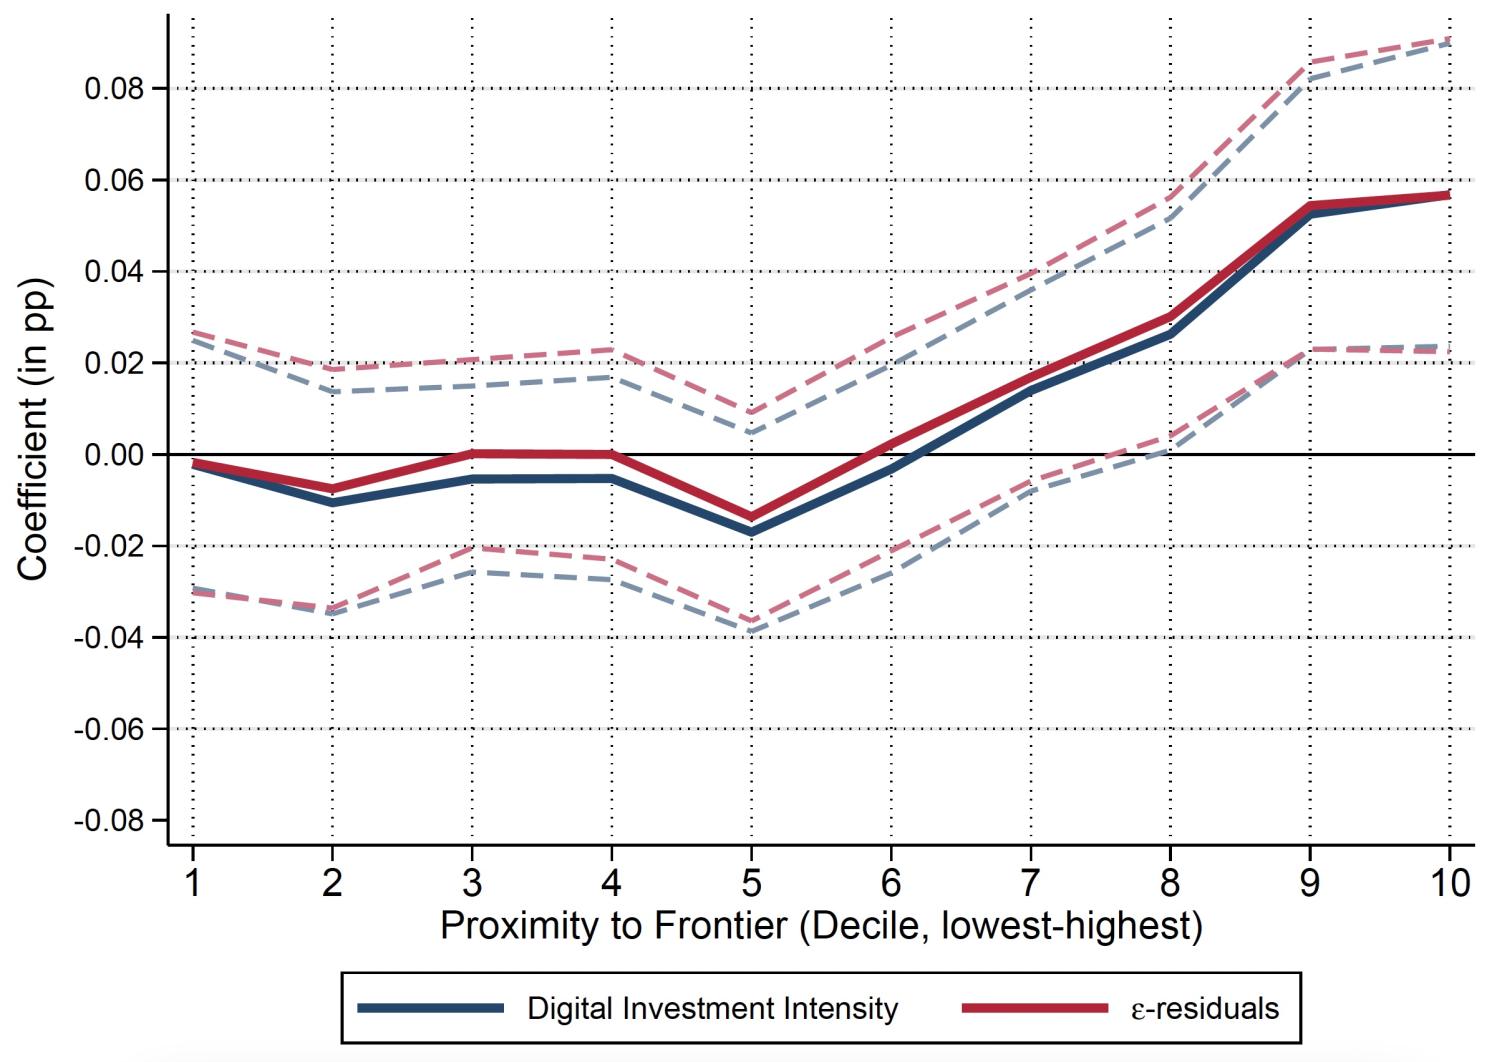 Figure 2 Marginal impact of digitalisation on laggards’ TFP growth by proximity to the frontier